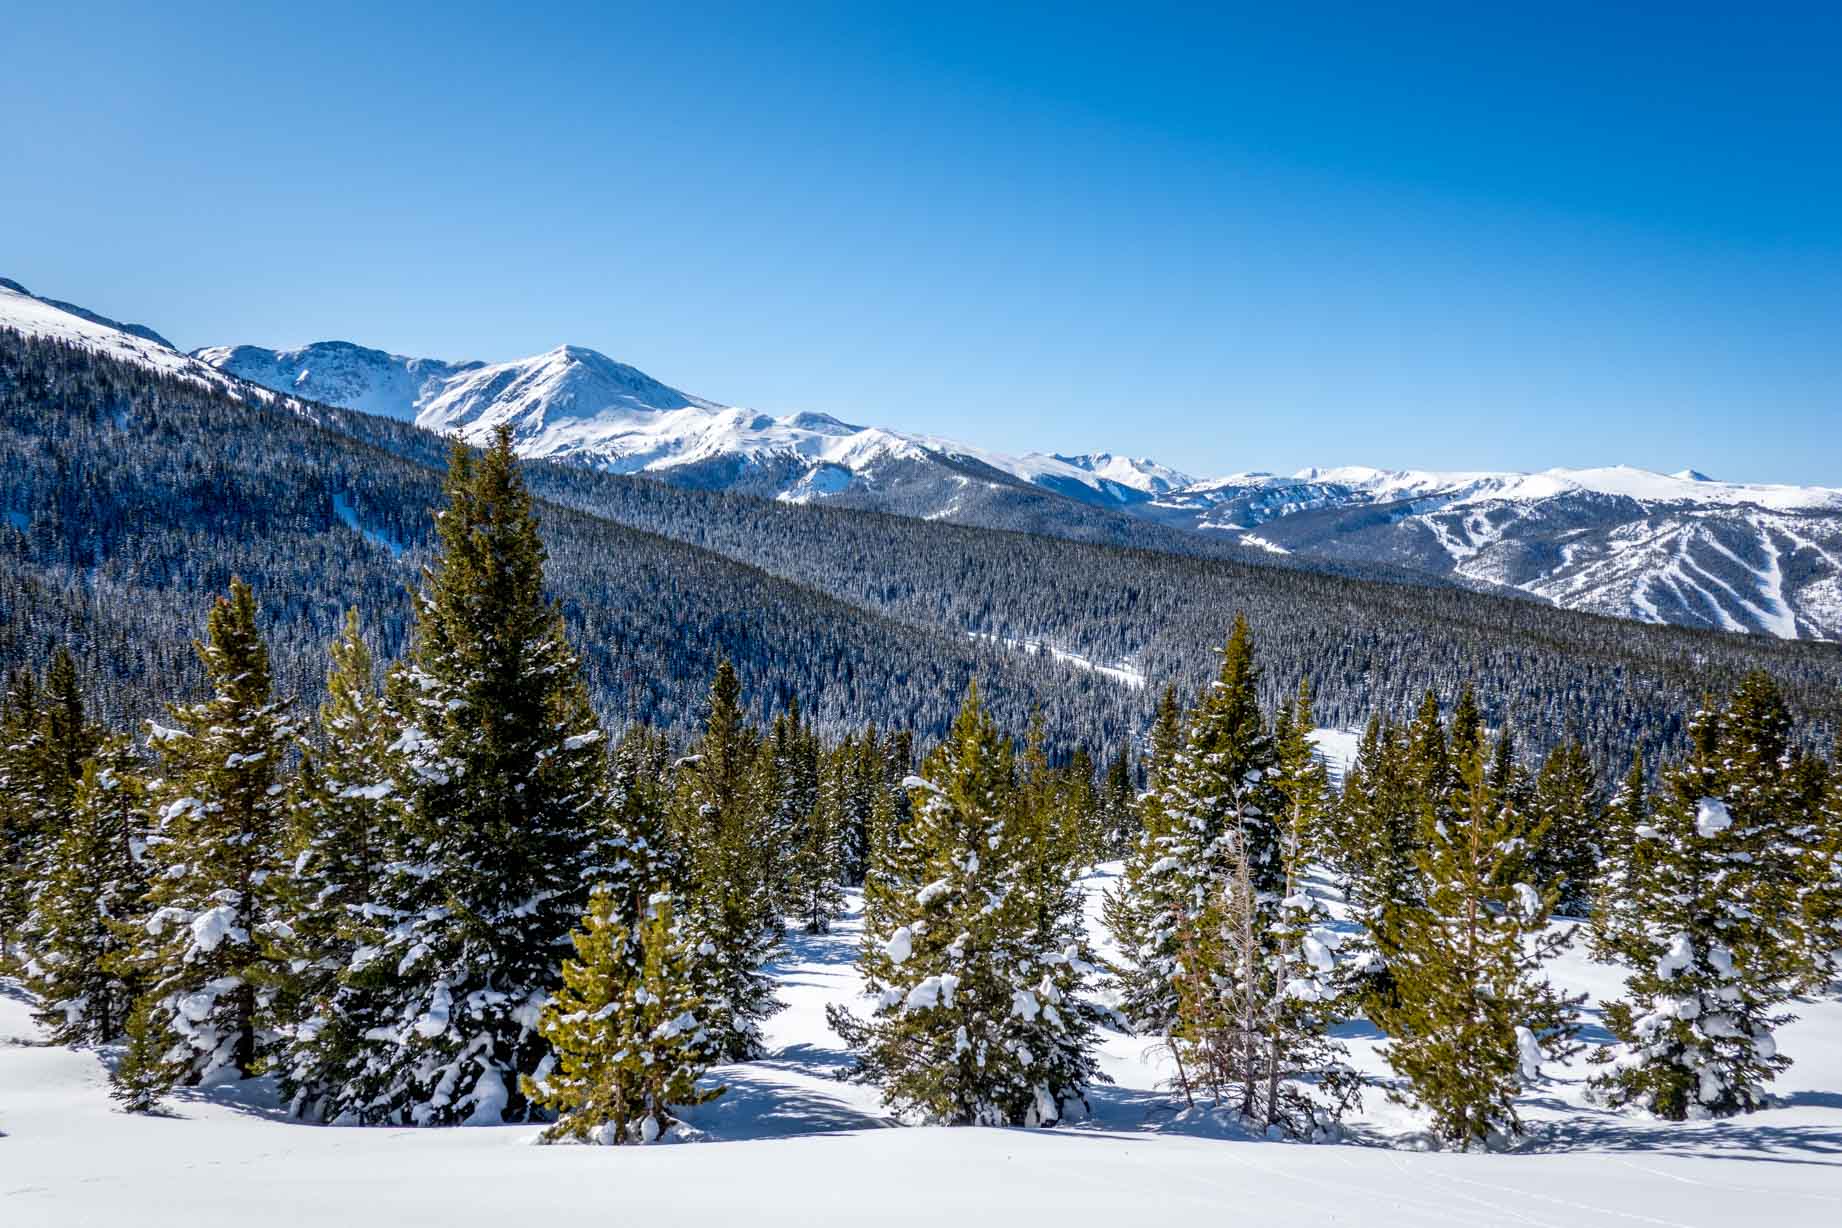 View of the Rocky Mountains in Winter Park, Colorado